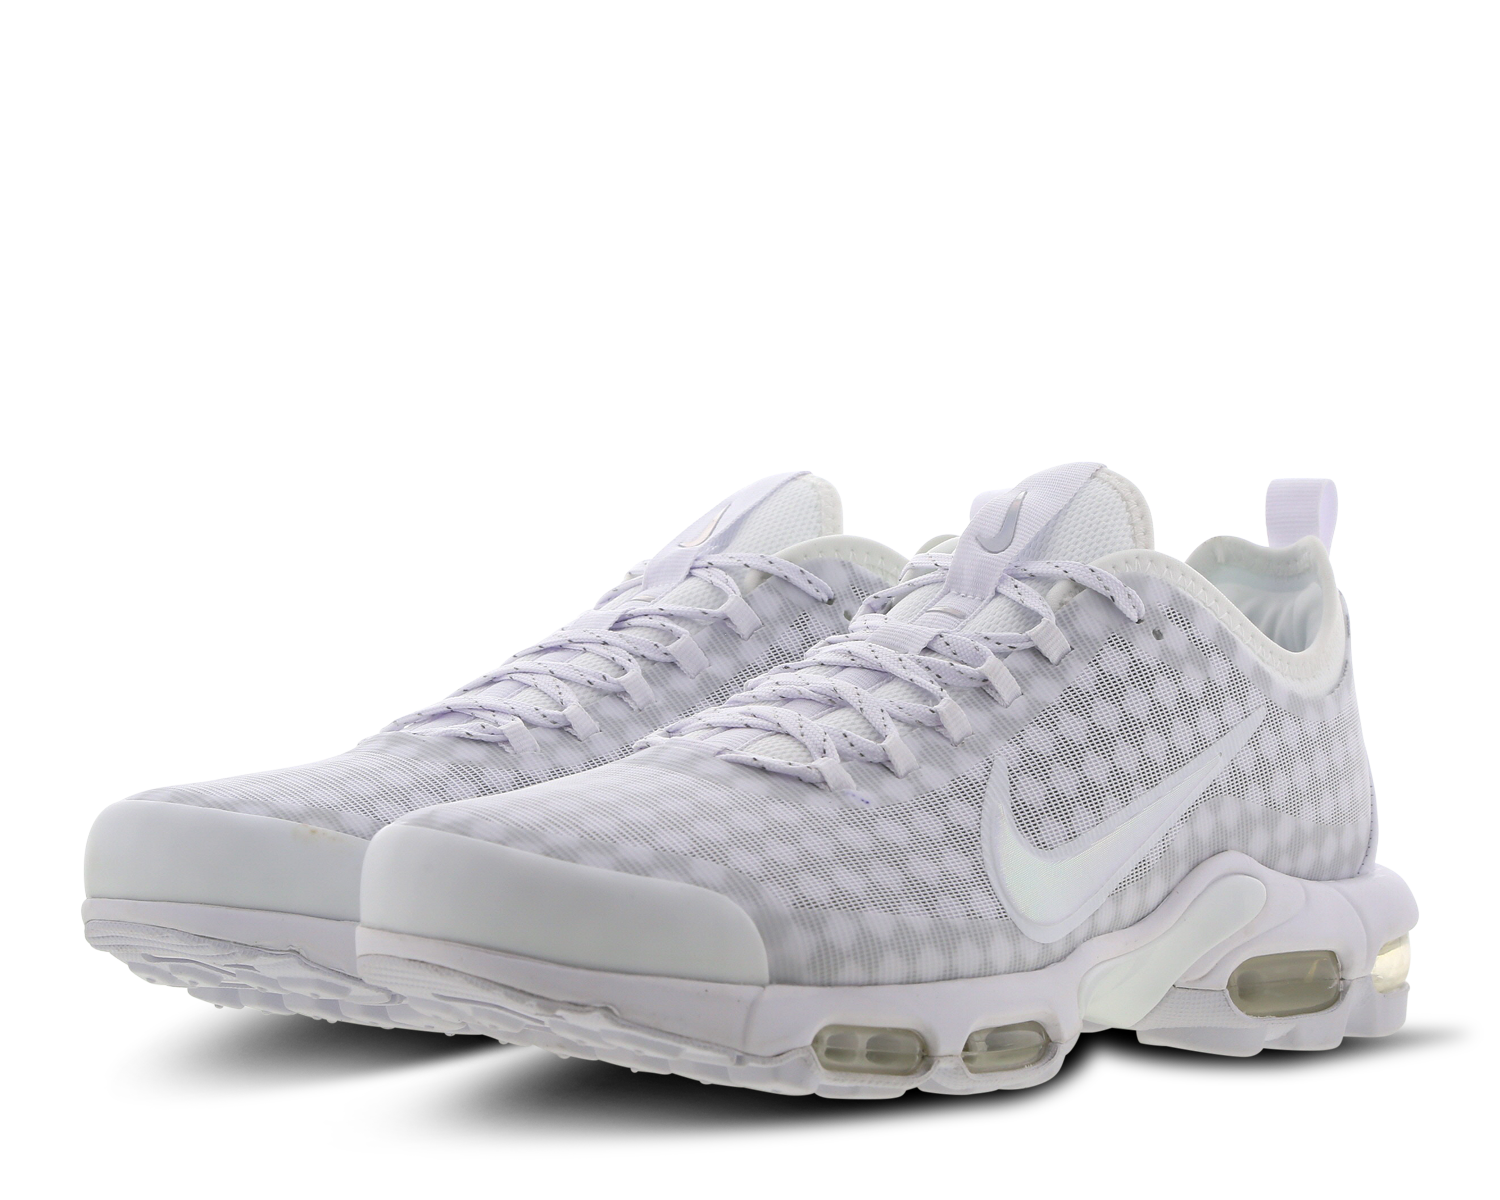 nike tuned 1 all white